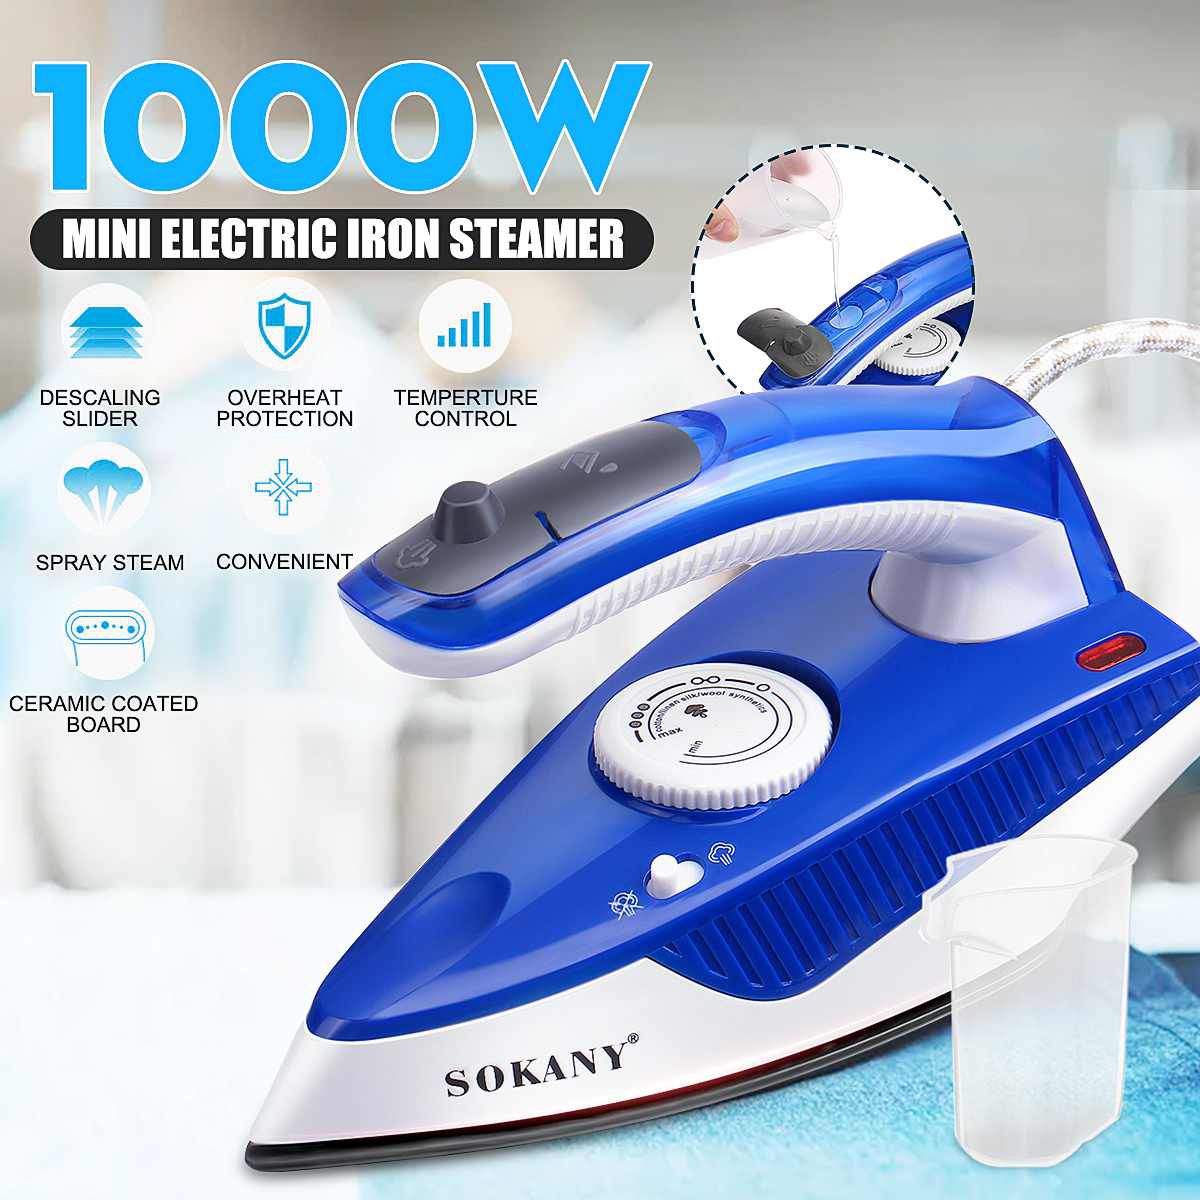 1000W Mini Spray Steam Iron Ceramic Coating Soleplate Folding Handle Electric Irons Temperature control Clothes Ironing Steamer